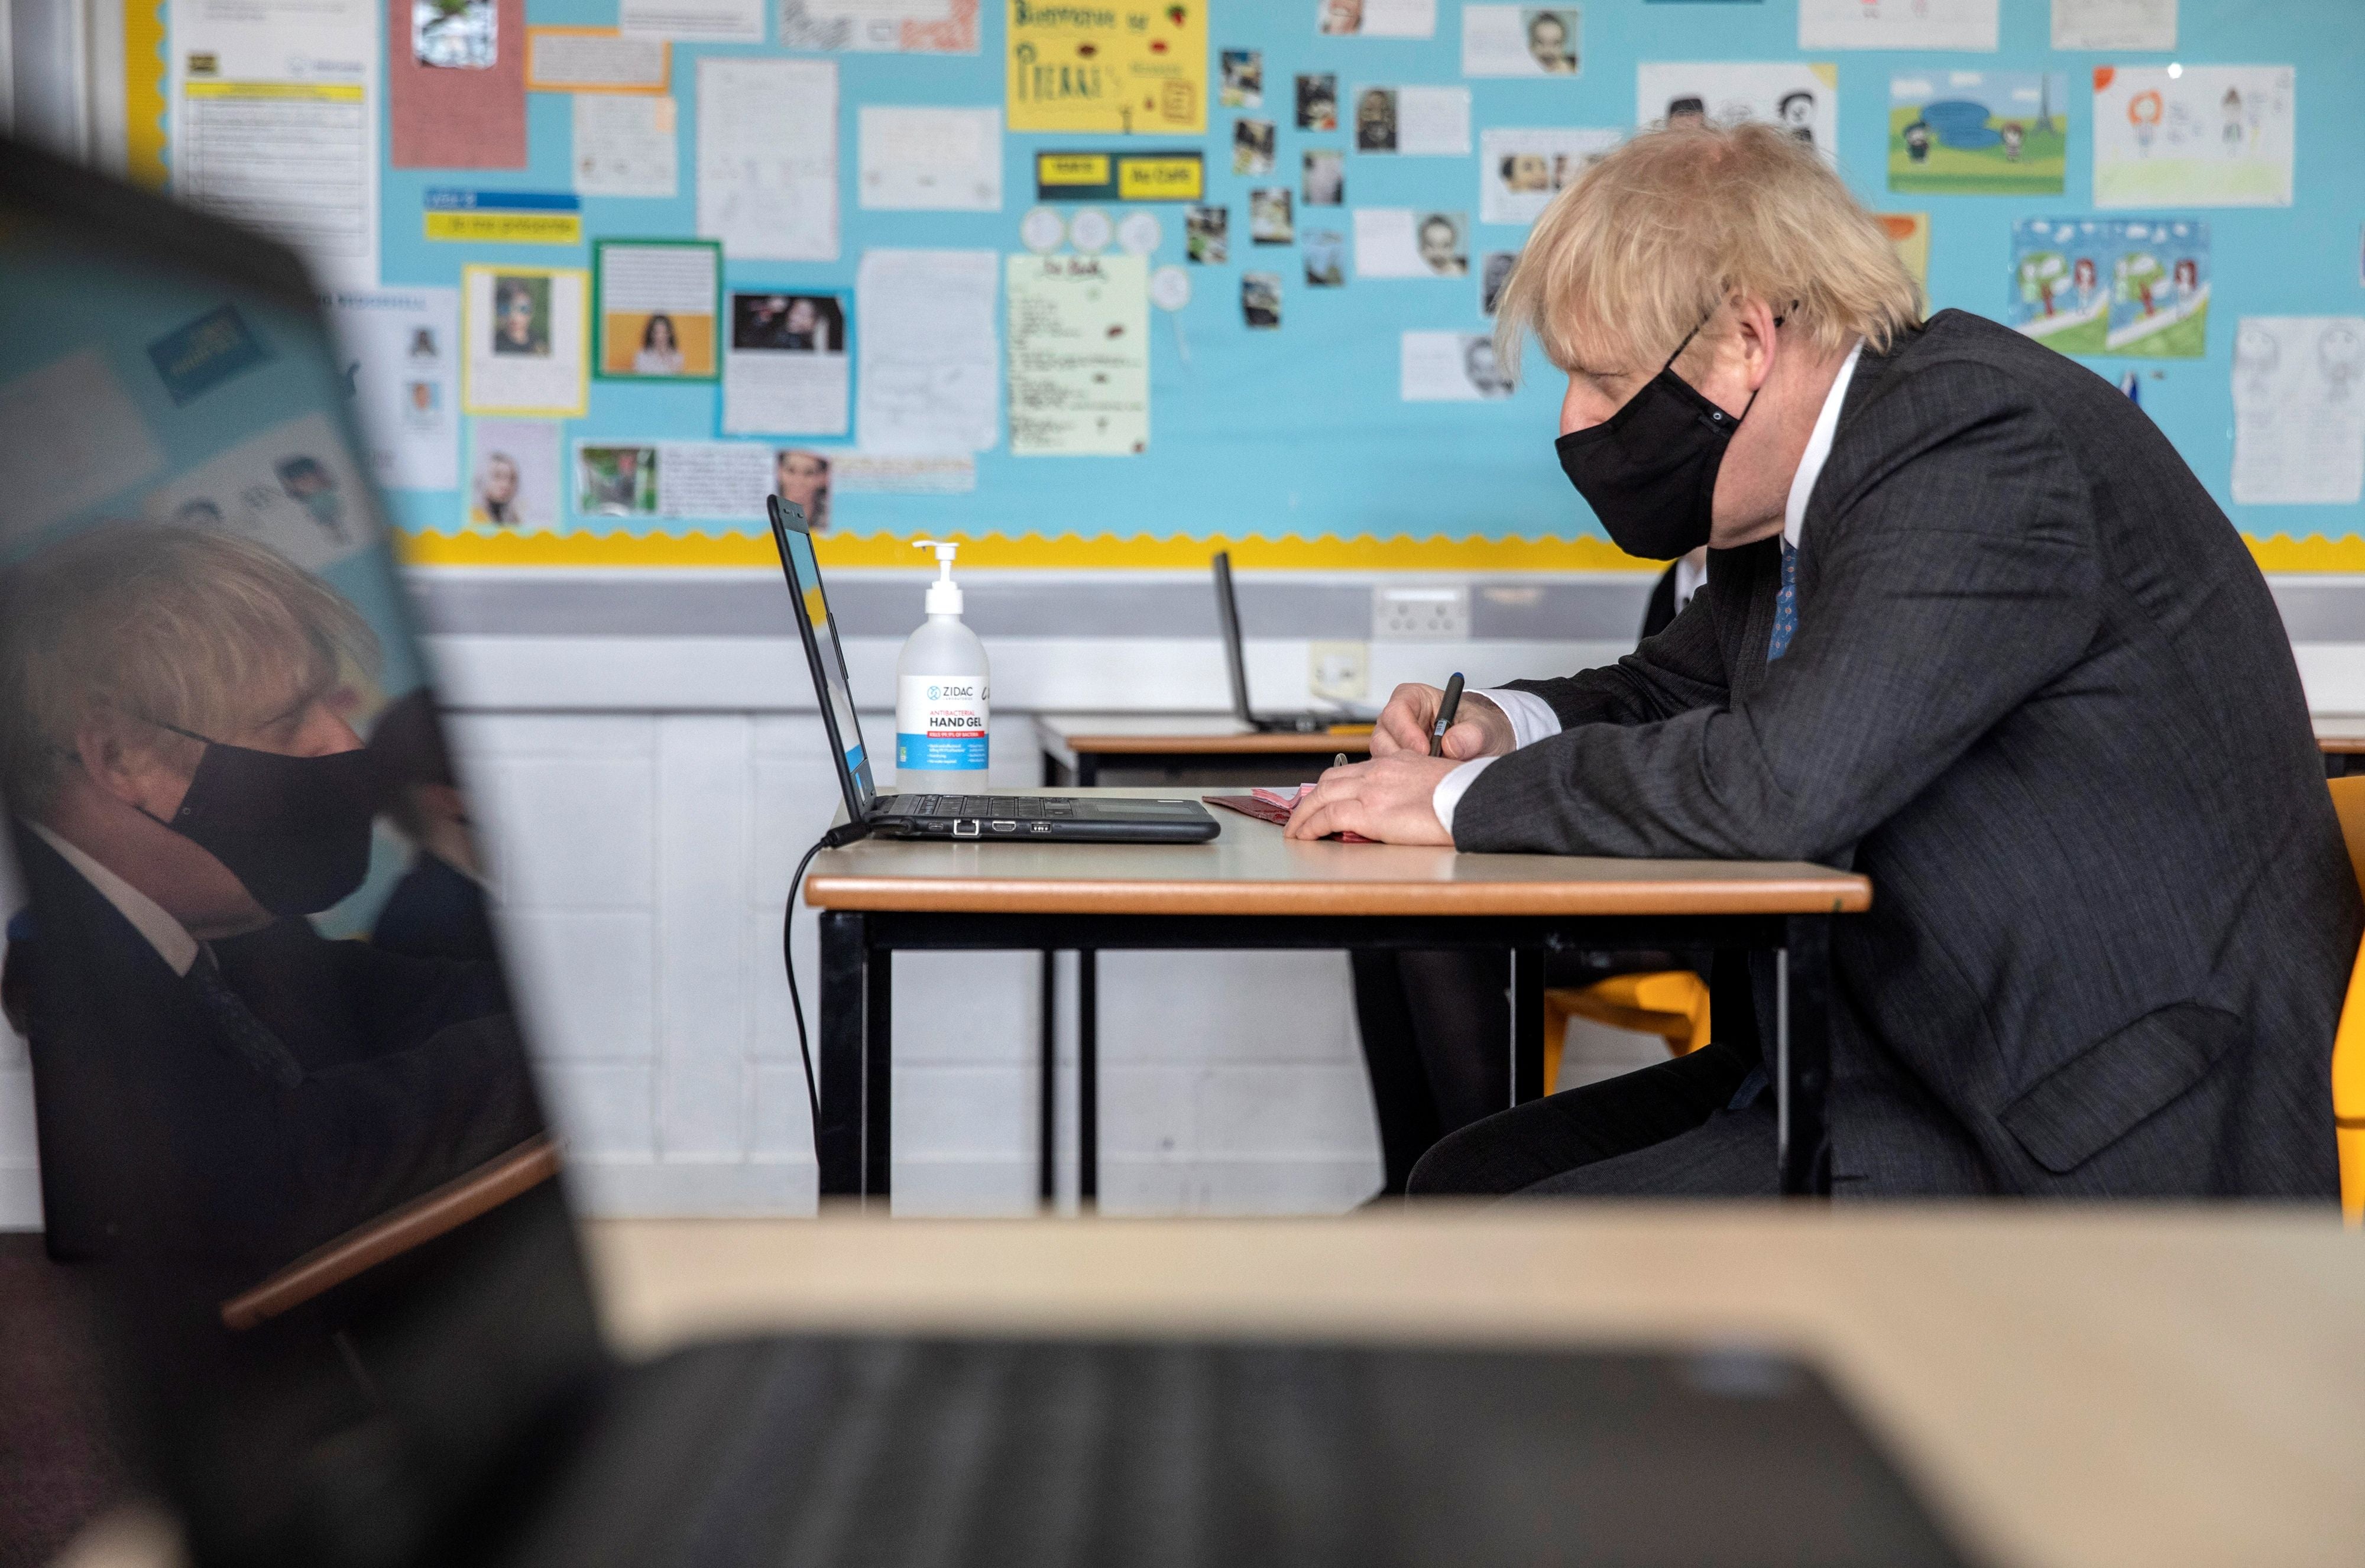 The prime minister visits a school to take part in an online lesson during lockdown